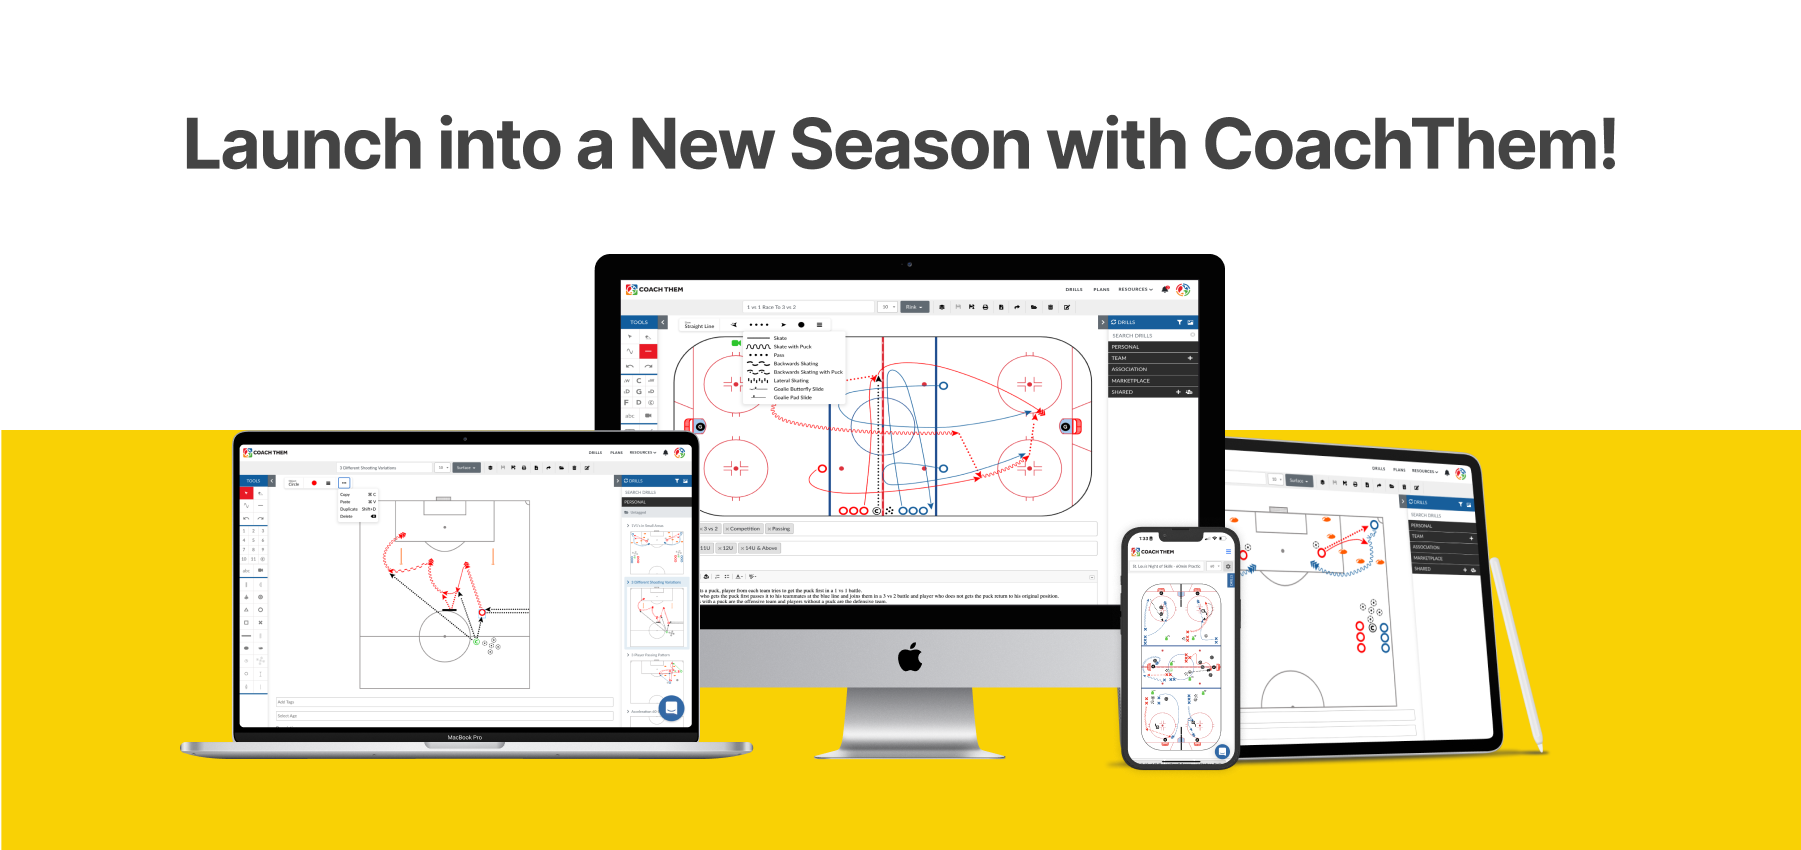 Launch into a New Season with CoachThem!